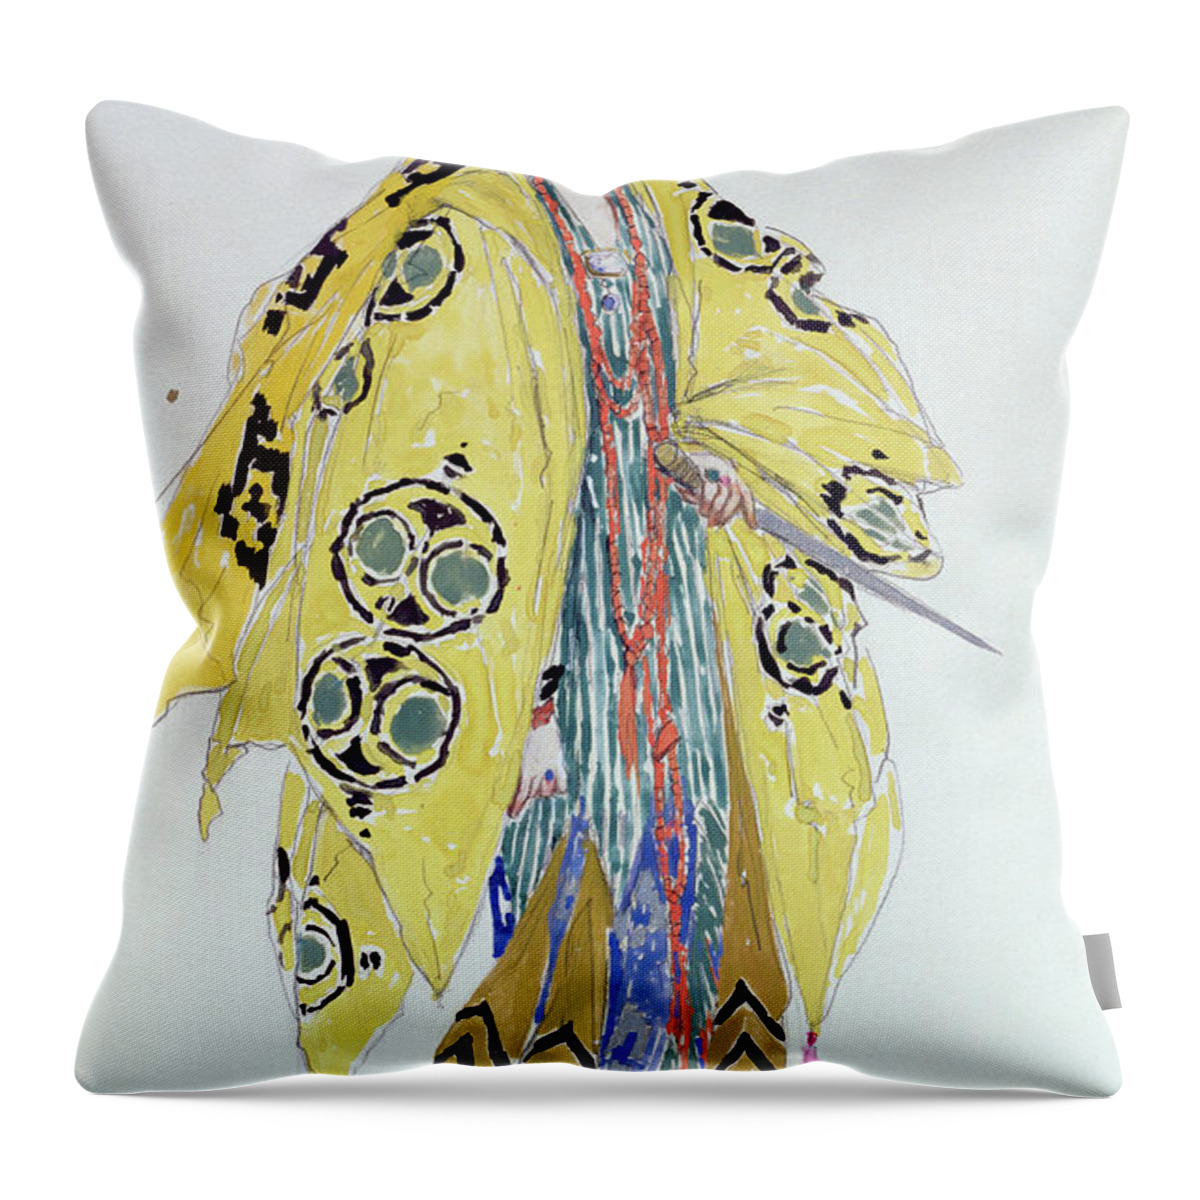 Art Throw Pillow featuring the photograph Theatrical Costume Design, 1919 by Charles Ricketts